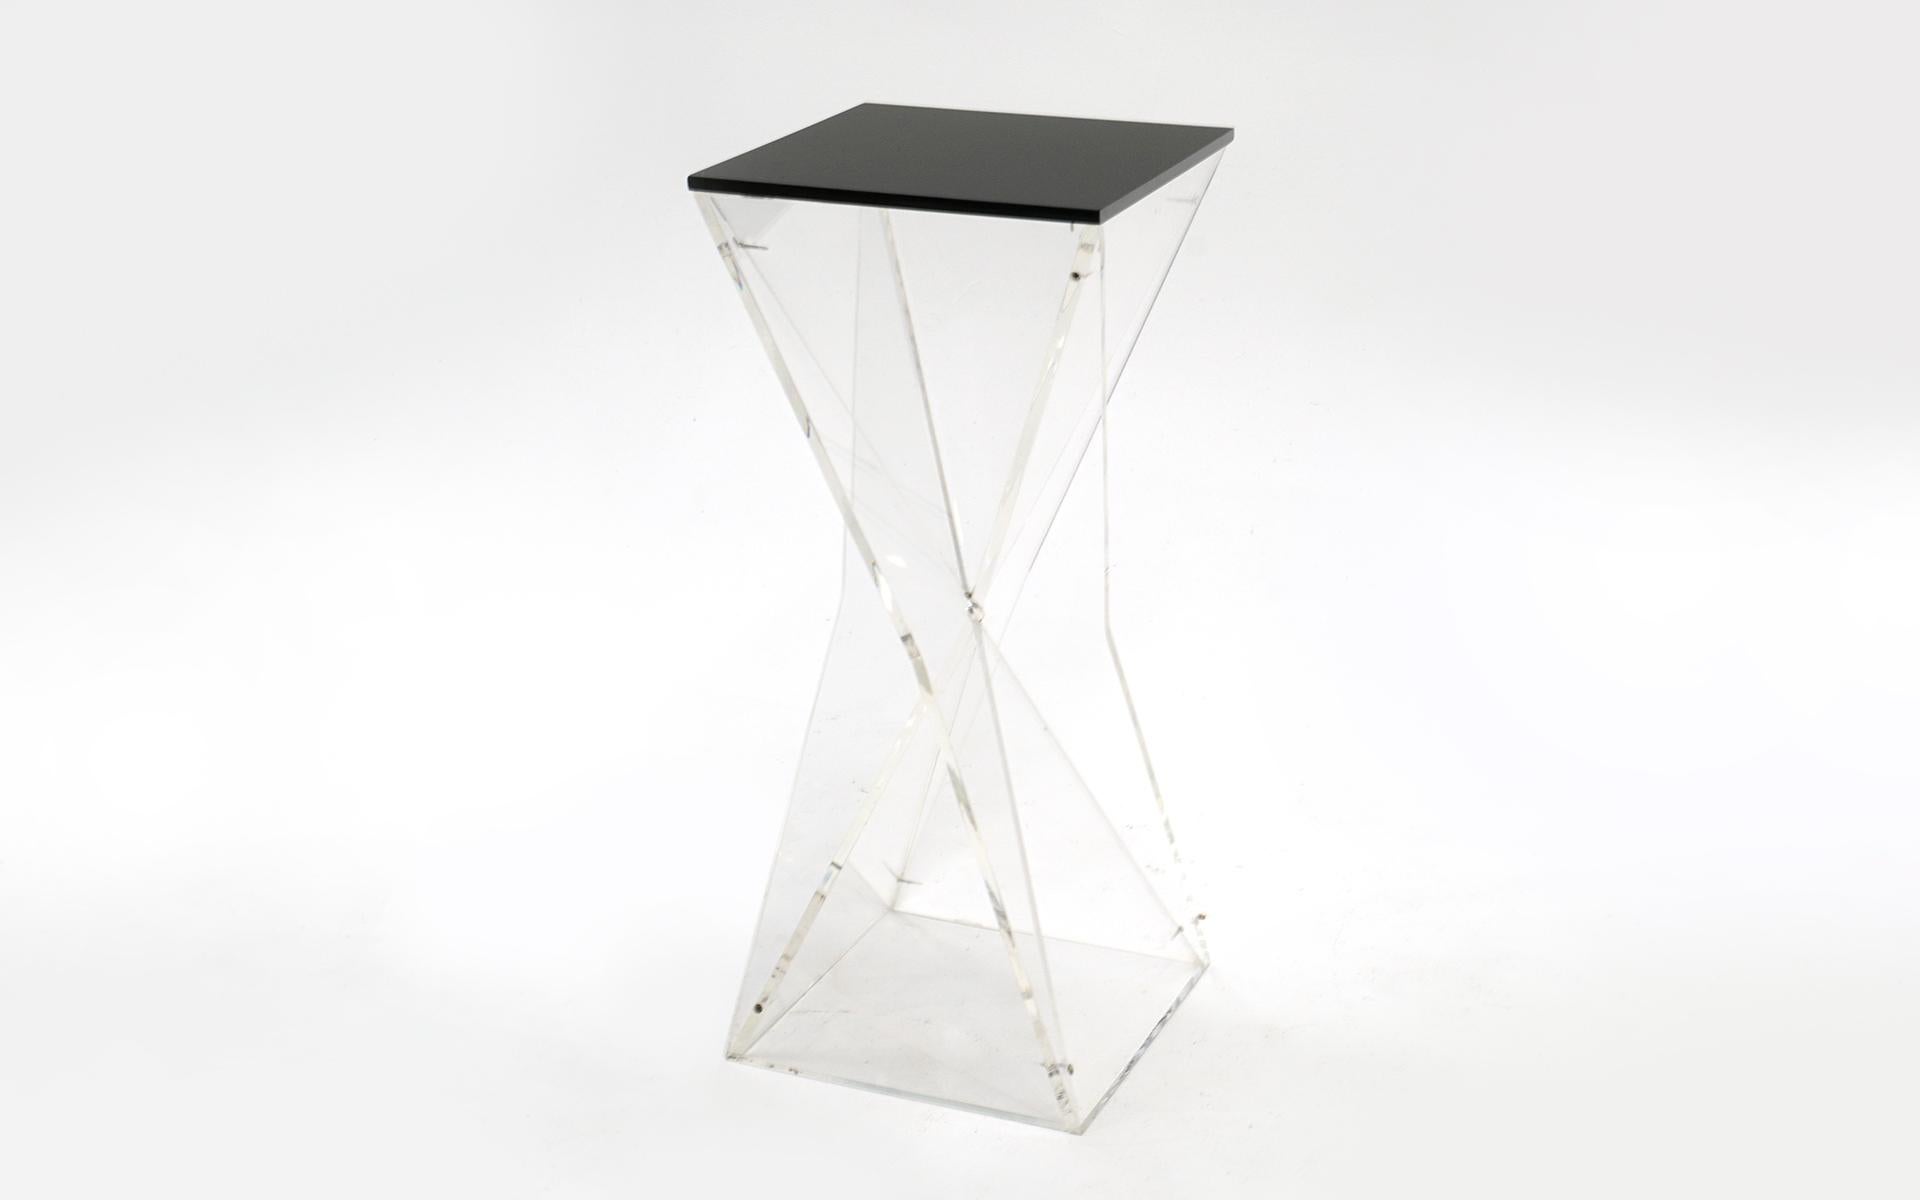 1970s Lucite pedestal / stand / table made of a full one half inch think acrylic. The frame and stand is clear and the removable acrylic top is black. Use is as an art pedestal or tall side table / entry table. Very sturdy geometric faceted